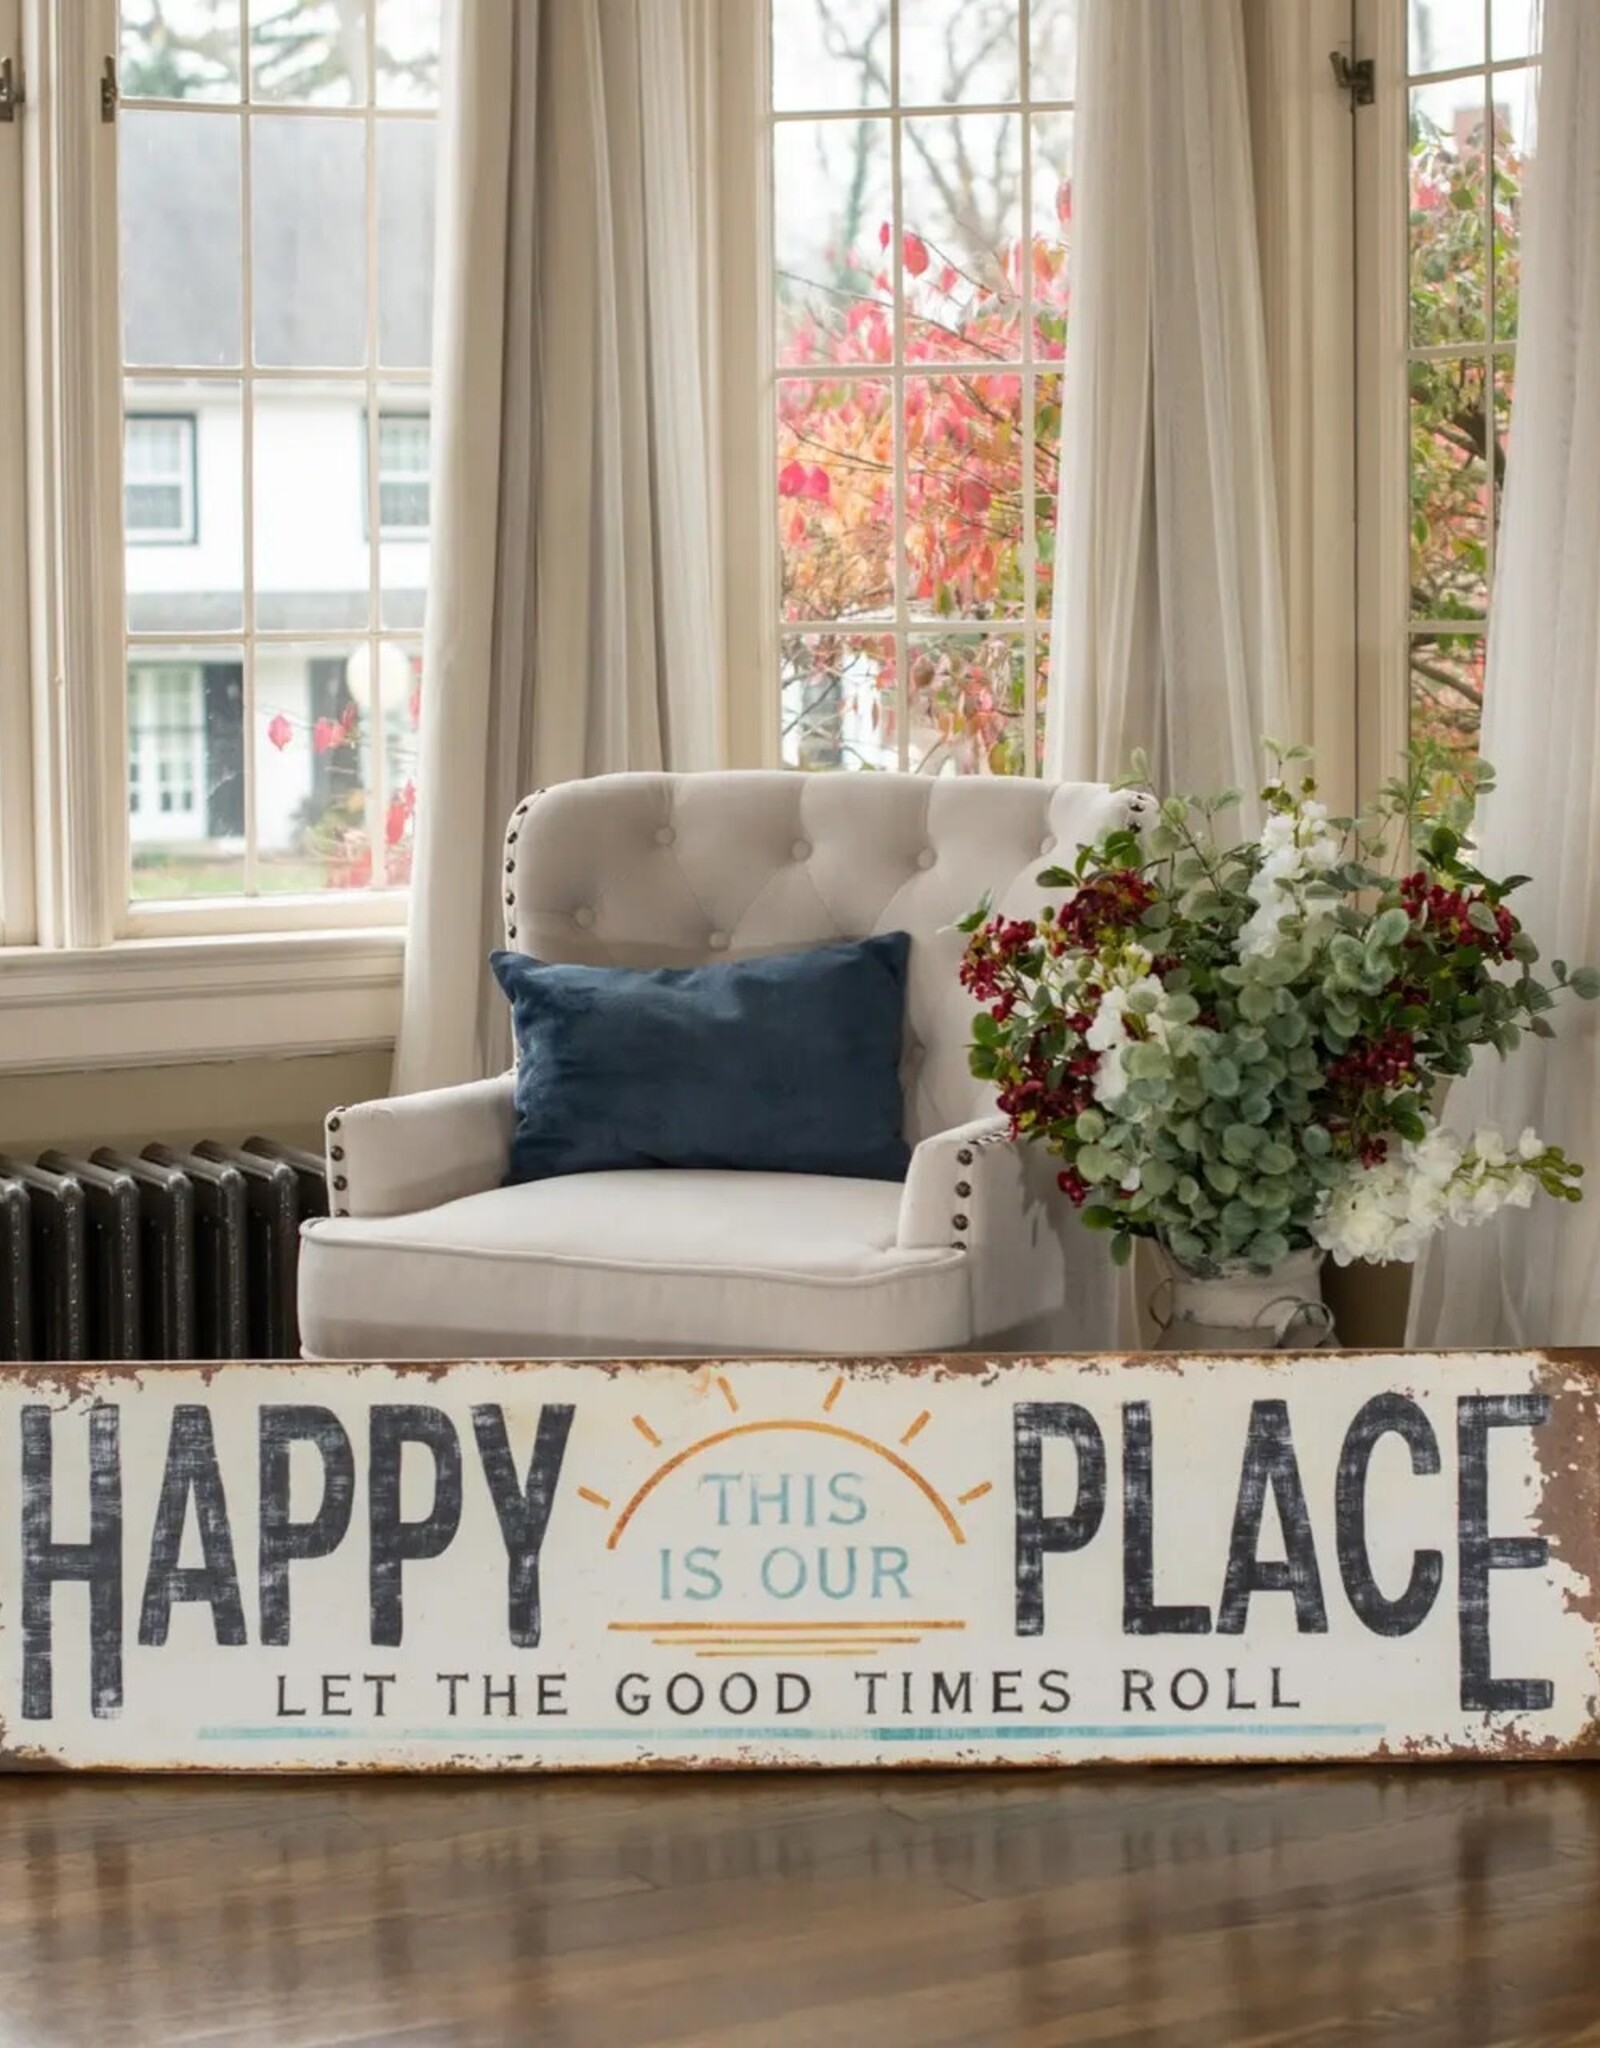 Ragon House HAPPY PLACE METAL SIGN 60"